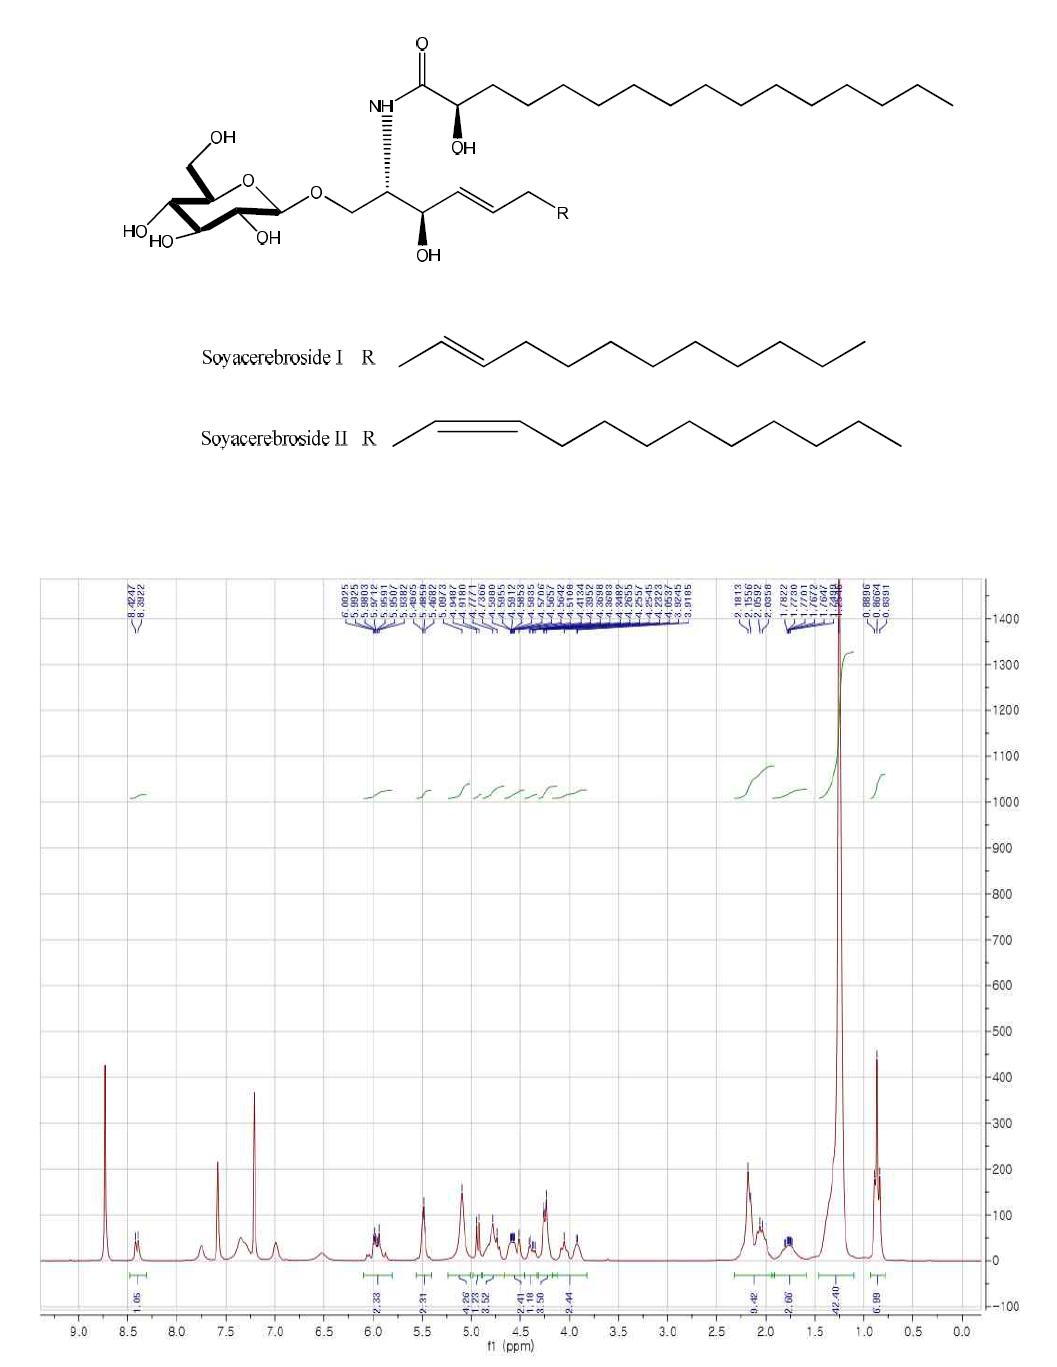 1H-NMR spectrum of compounds 9 and 10 in Pyridine-d5 (600 MHz)